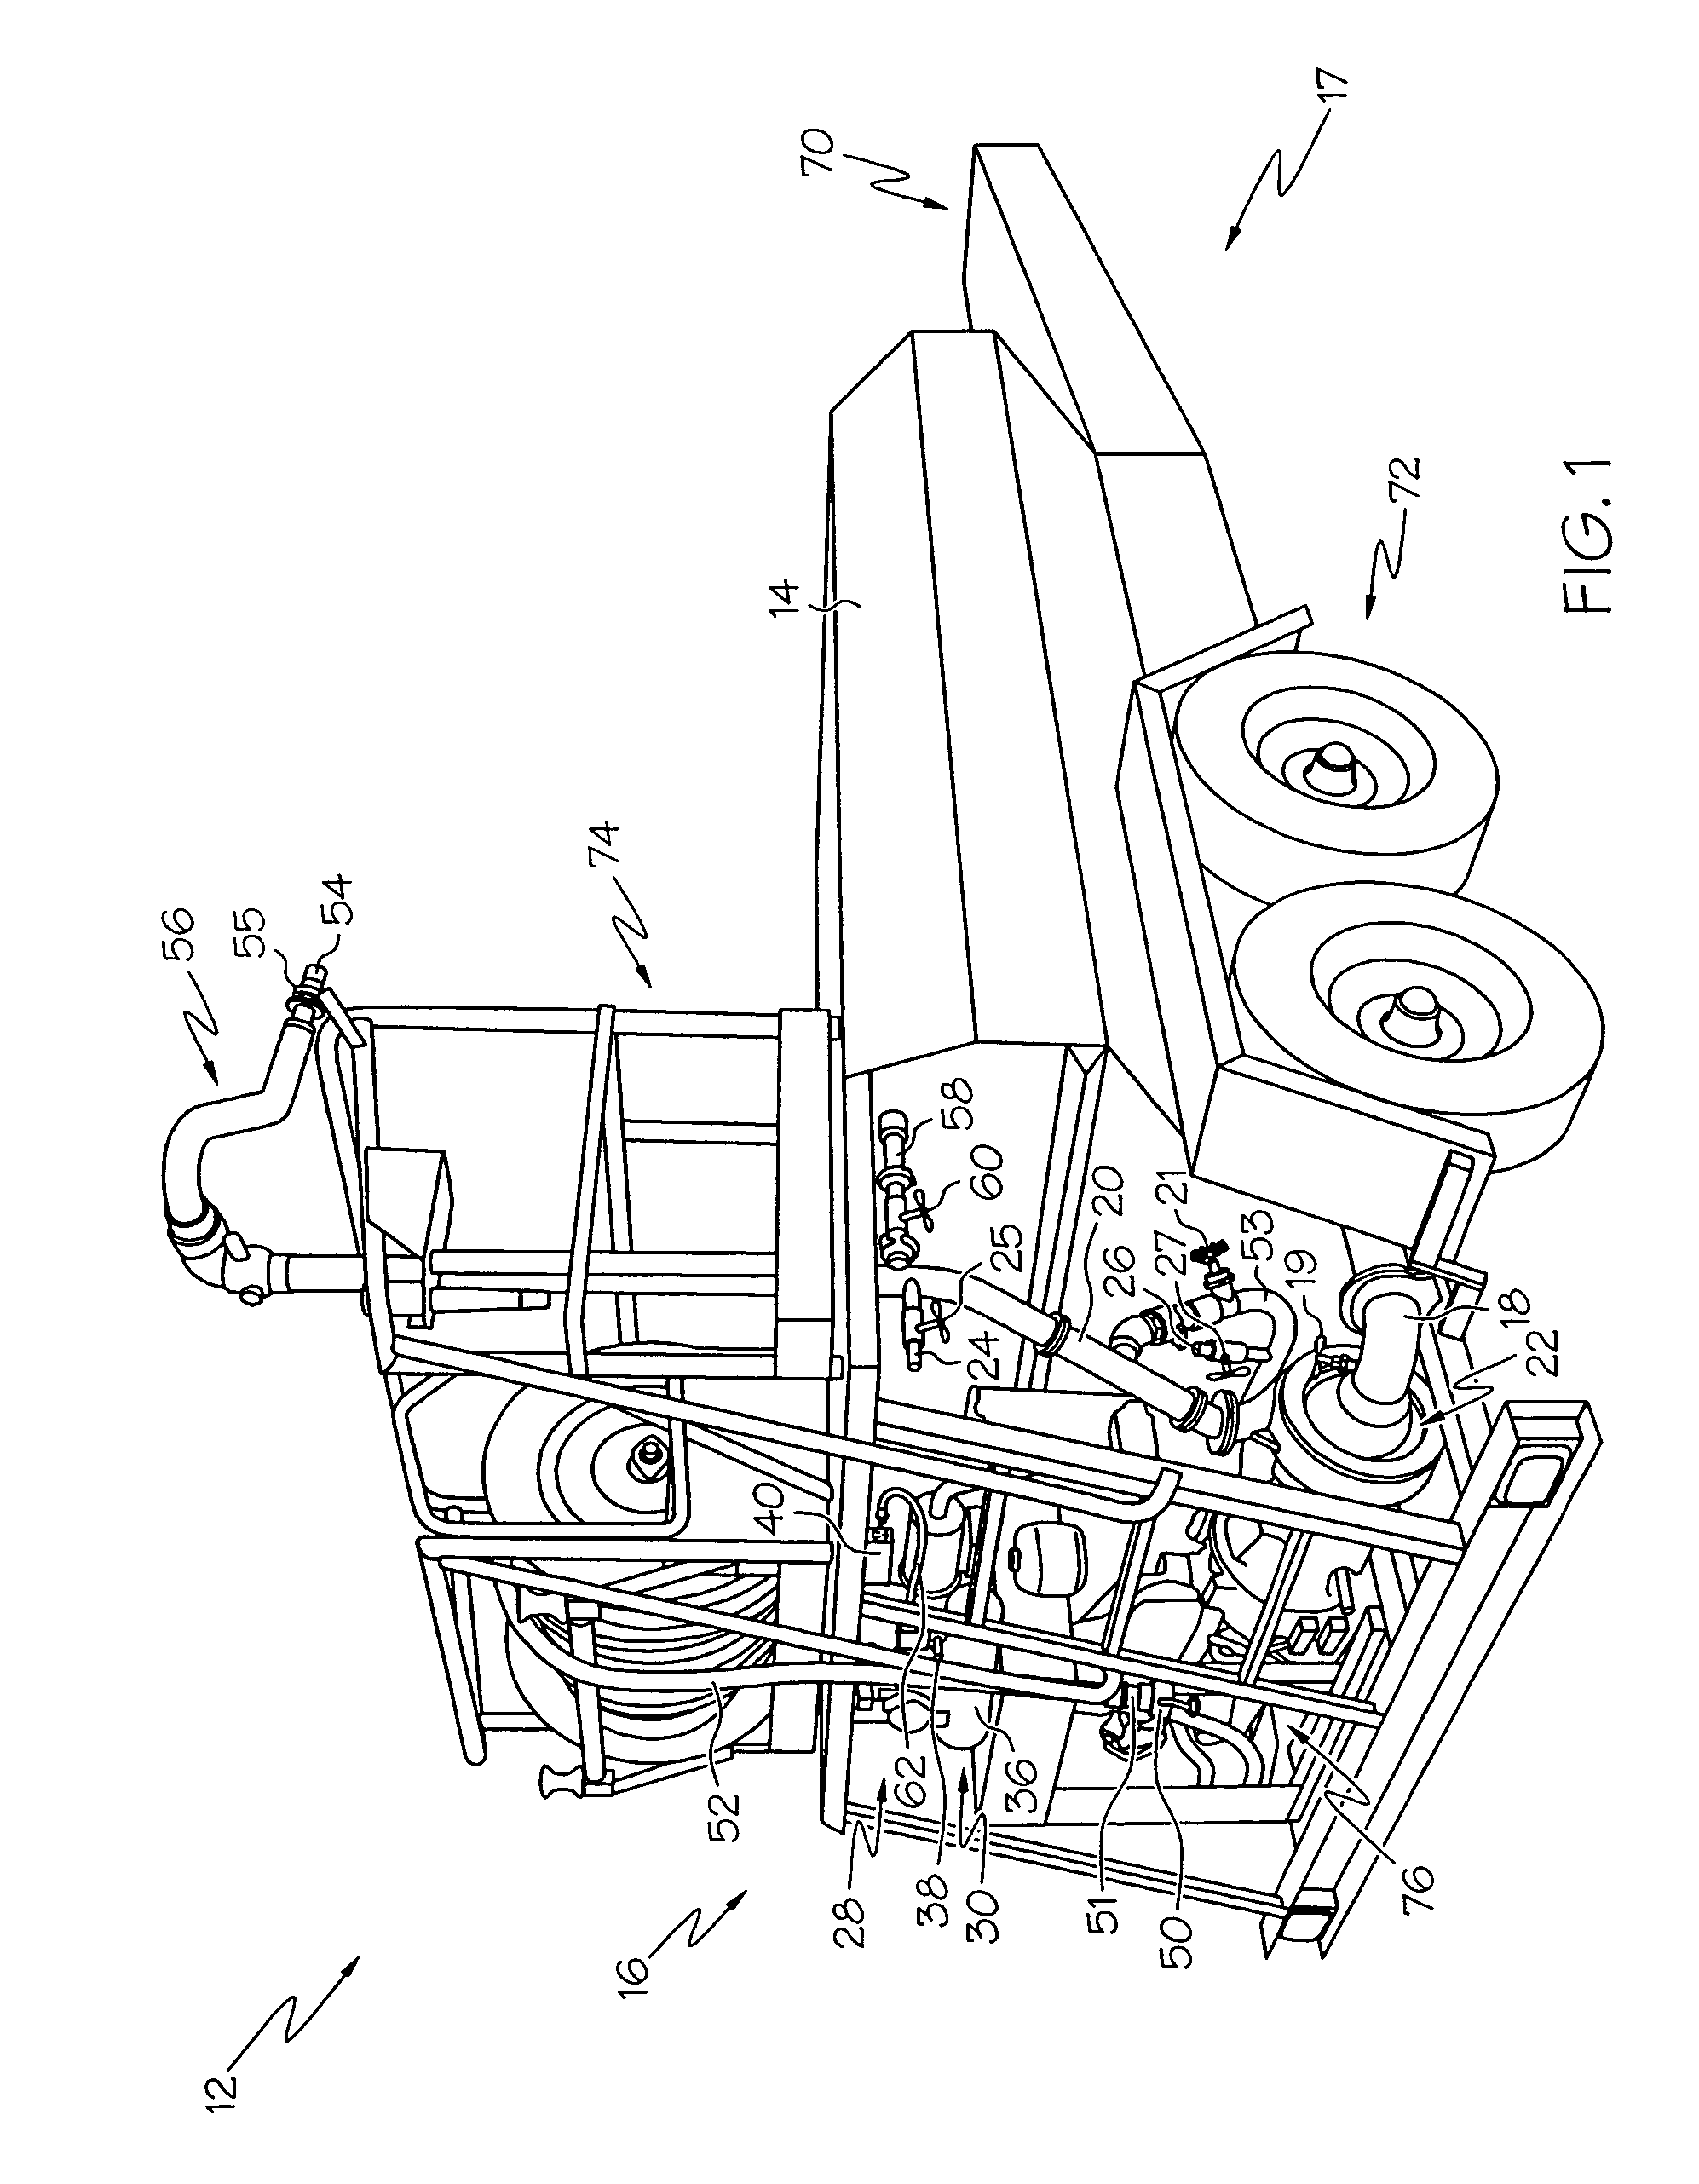 Vehicles and bulk material distribution apparatuses including air flush system and methods